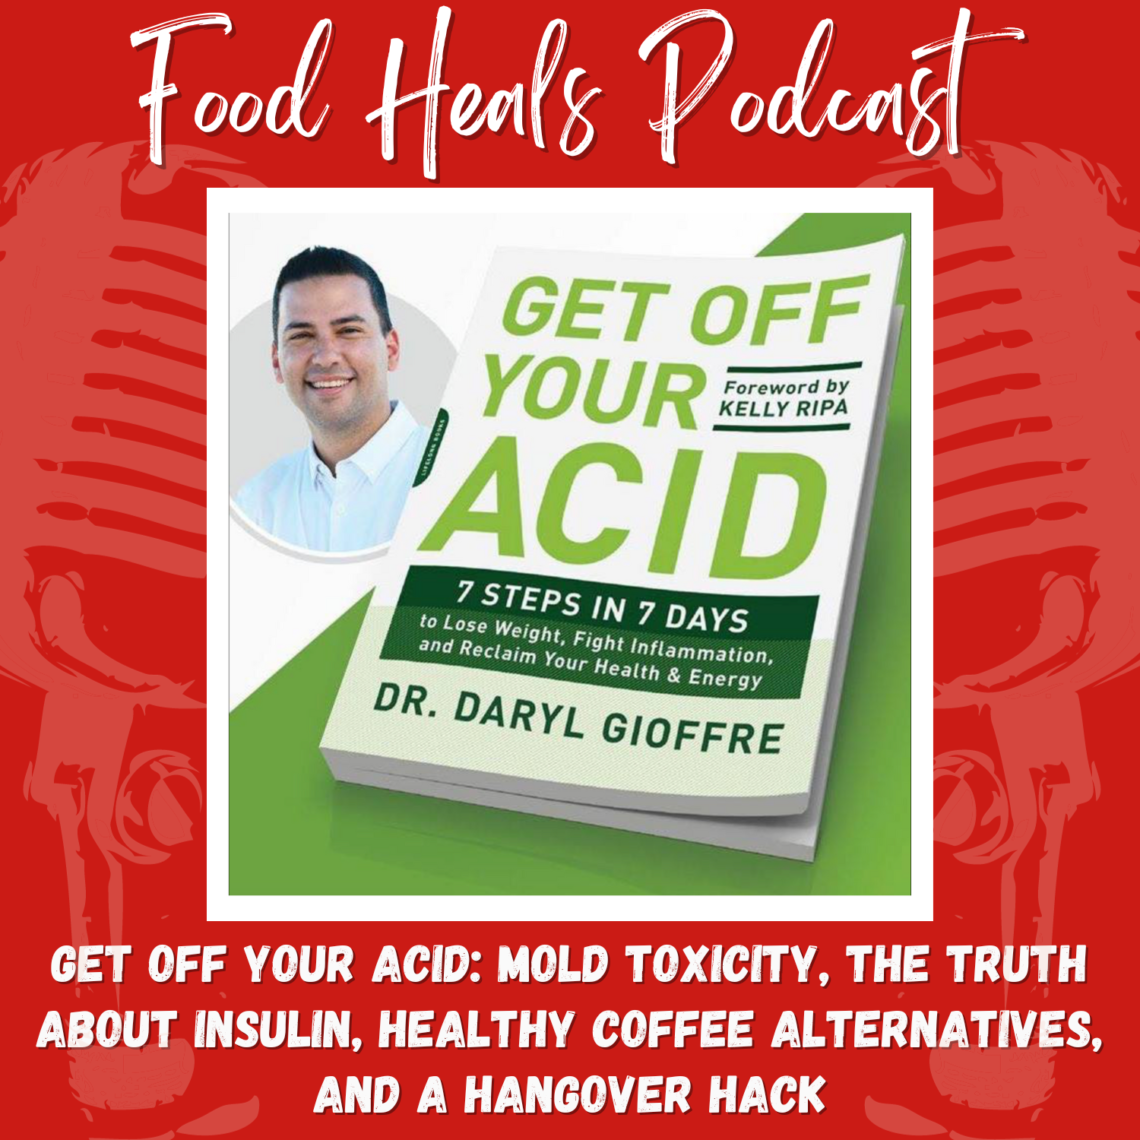 Get Off Your Acid: Mold Toxicity, The Truth About Insulin, Healthy Coffee Alternatives, and a Hangover Hack with Dr. Daryl Gioffre (Part 2) with Allison Melody on The Food Heals Podcast